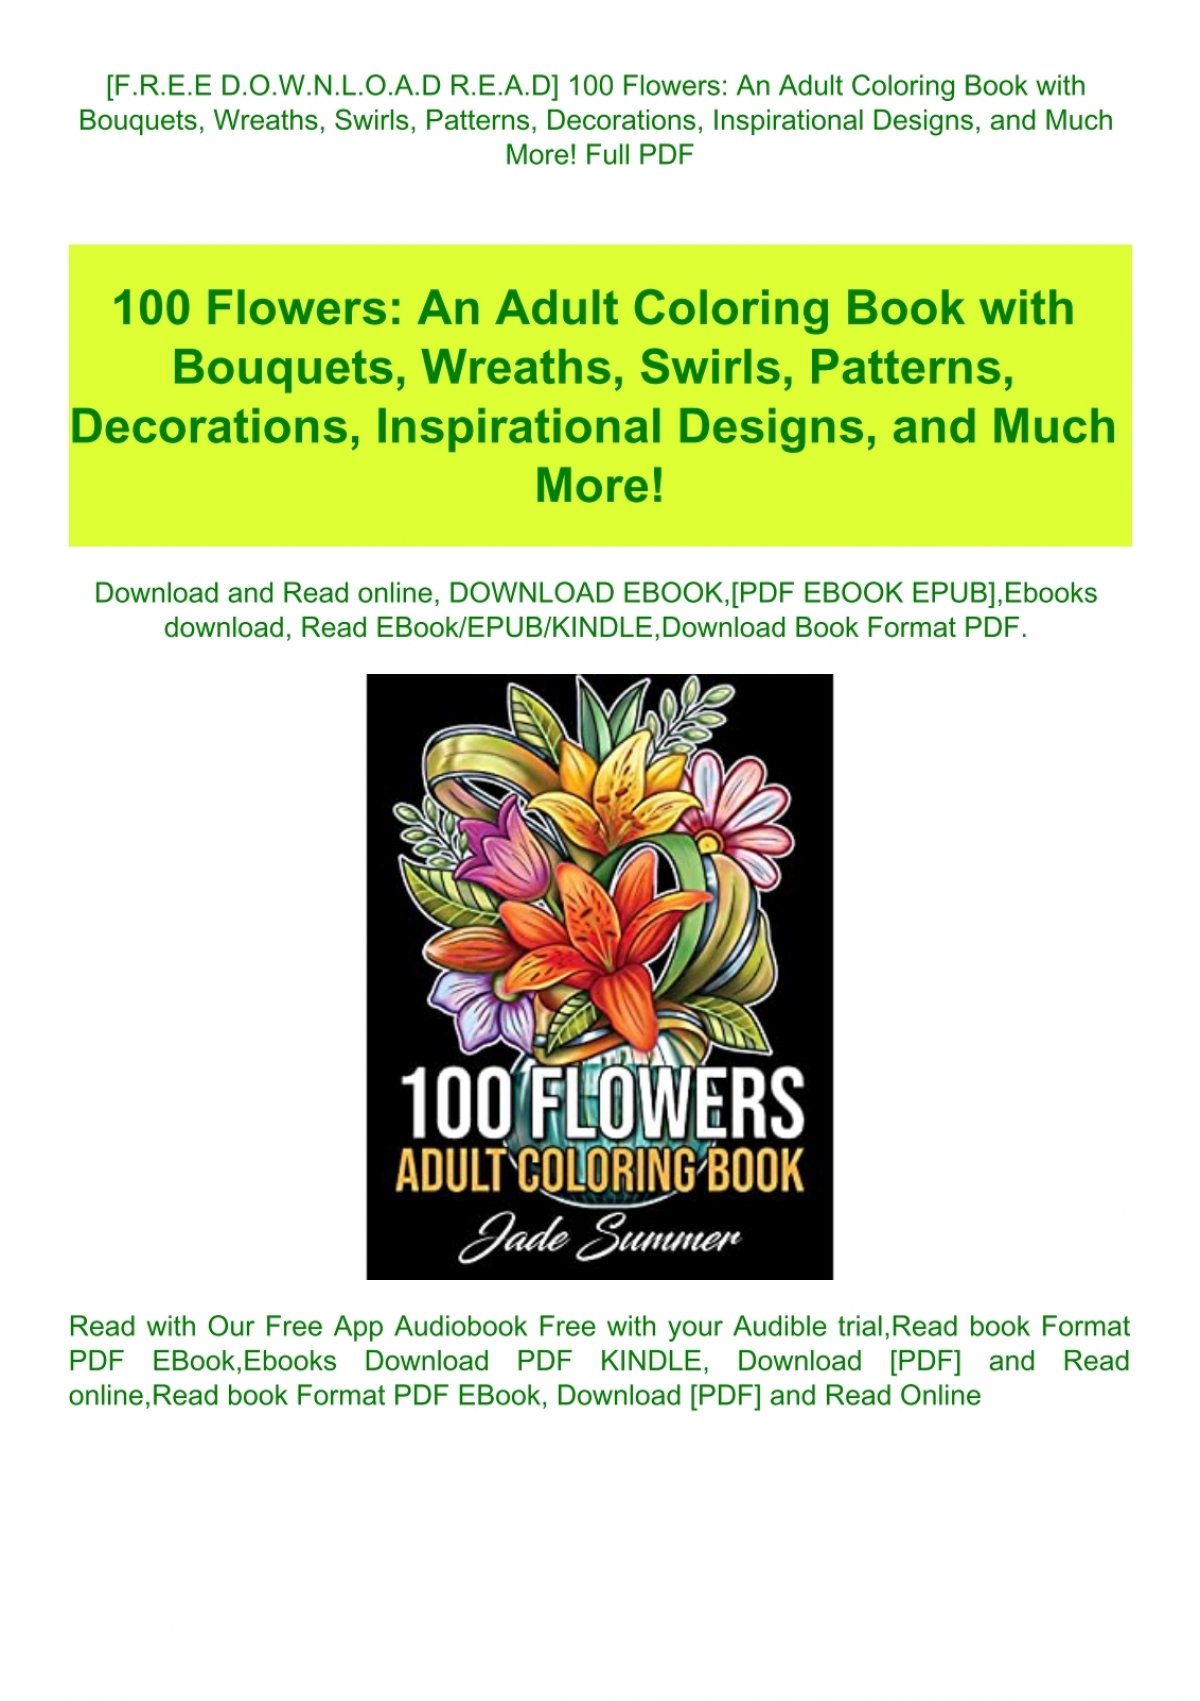 Download F R E E D O W N L O A D R E A D 100 Flowers An Adult Coloring Book With Bouquets Wreaths Swirls Patterns Decorations Inspirational Designs And Much More Full Pdf